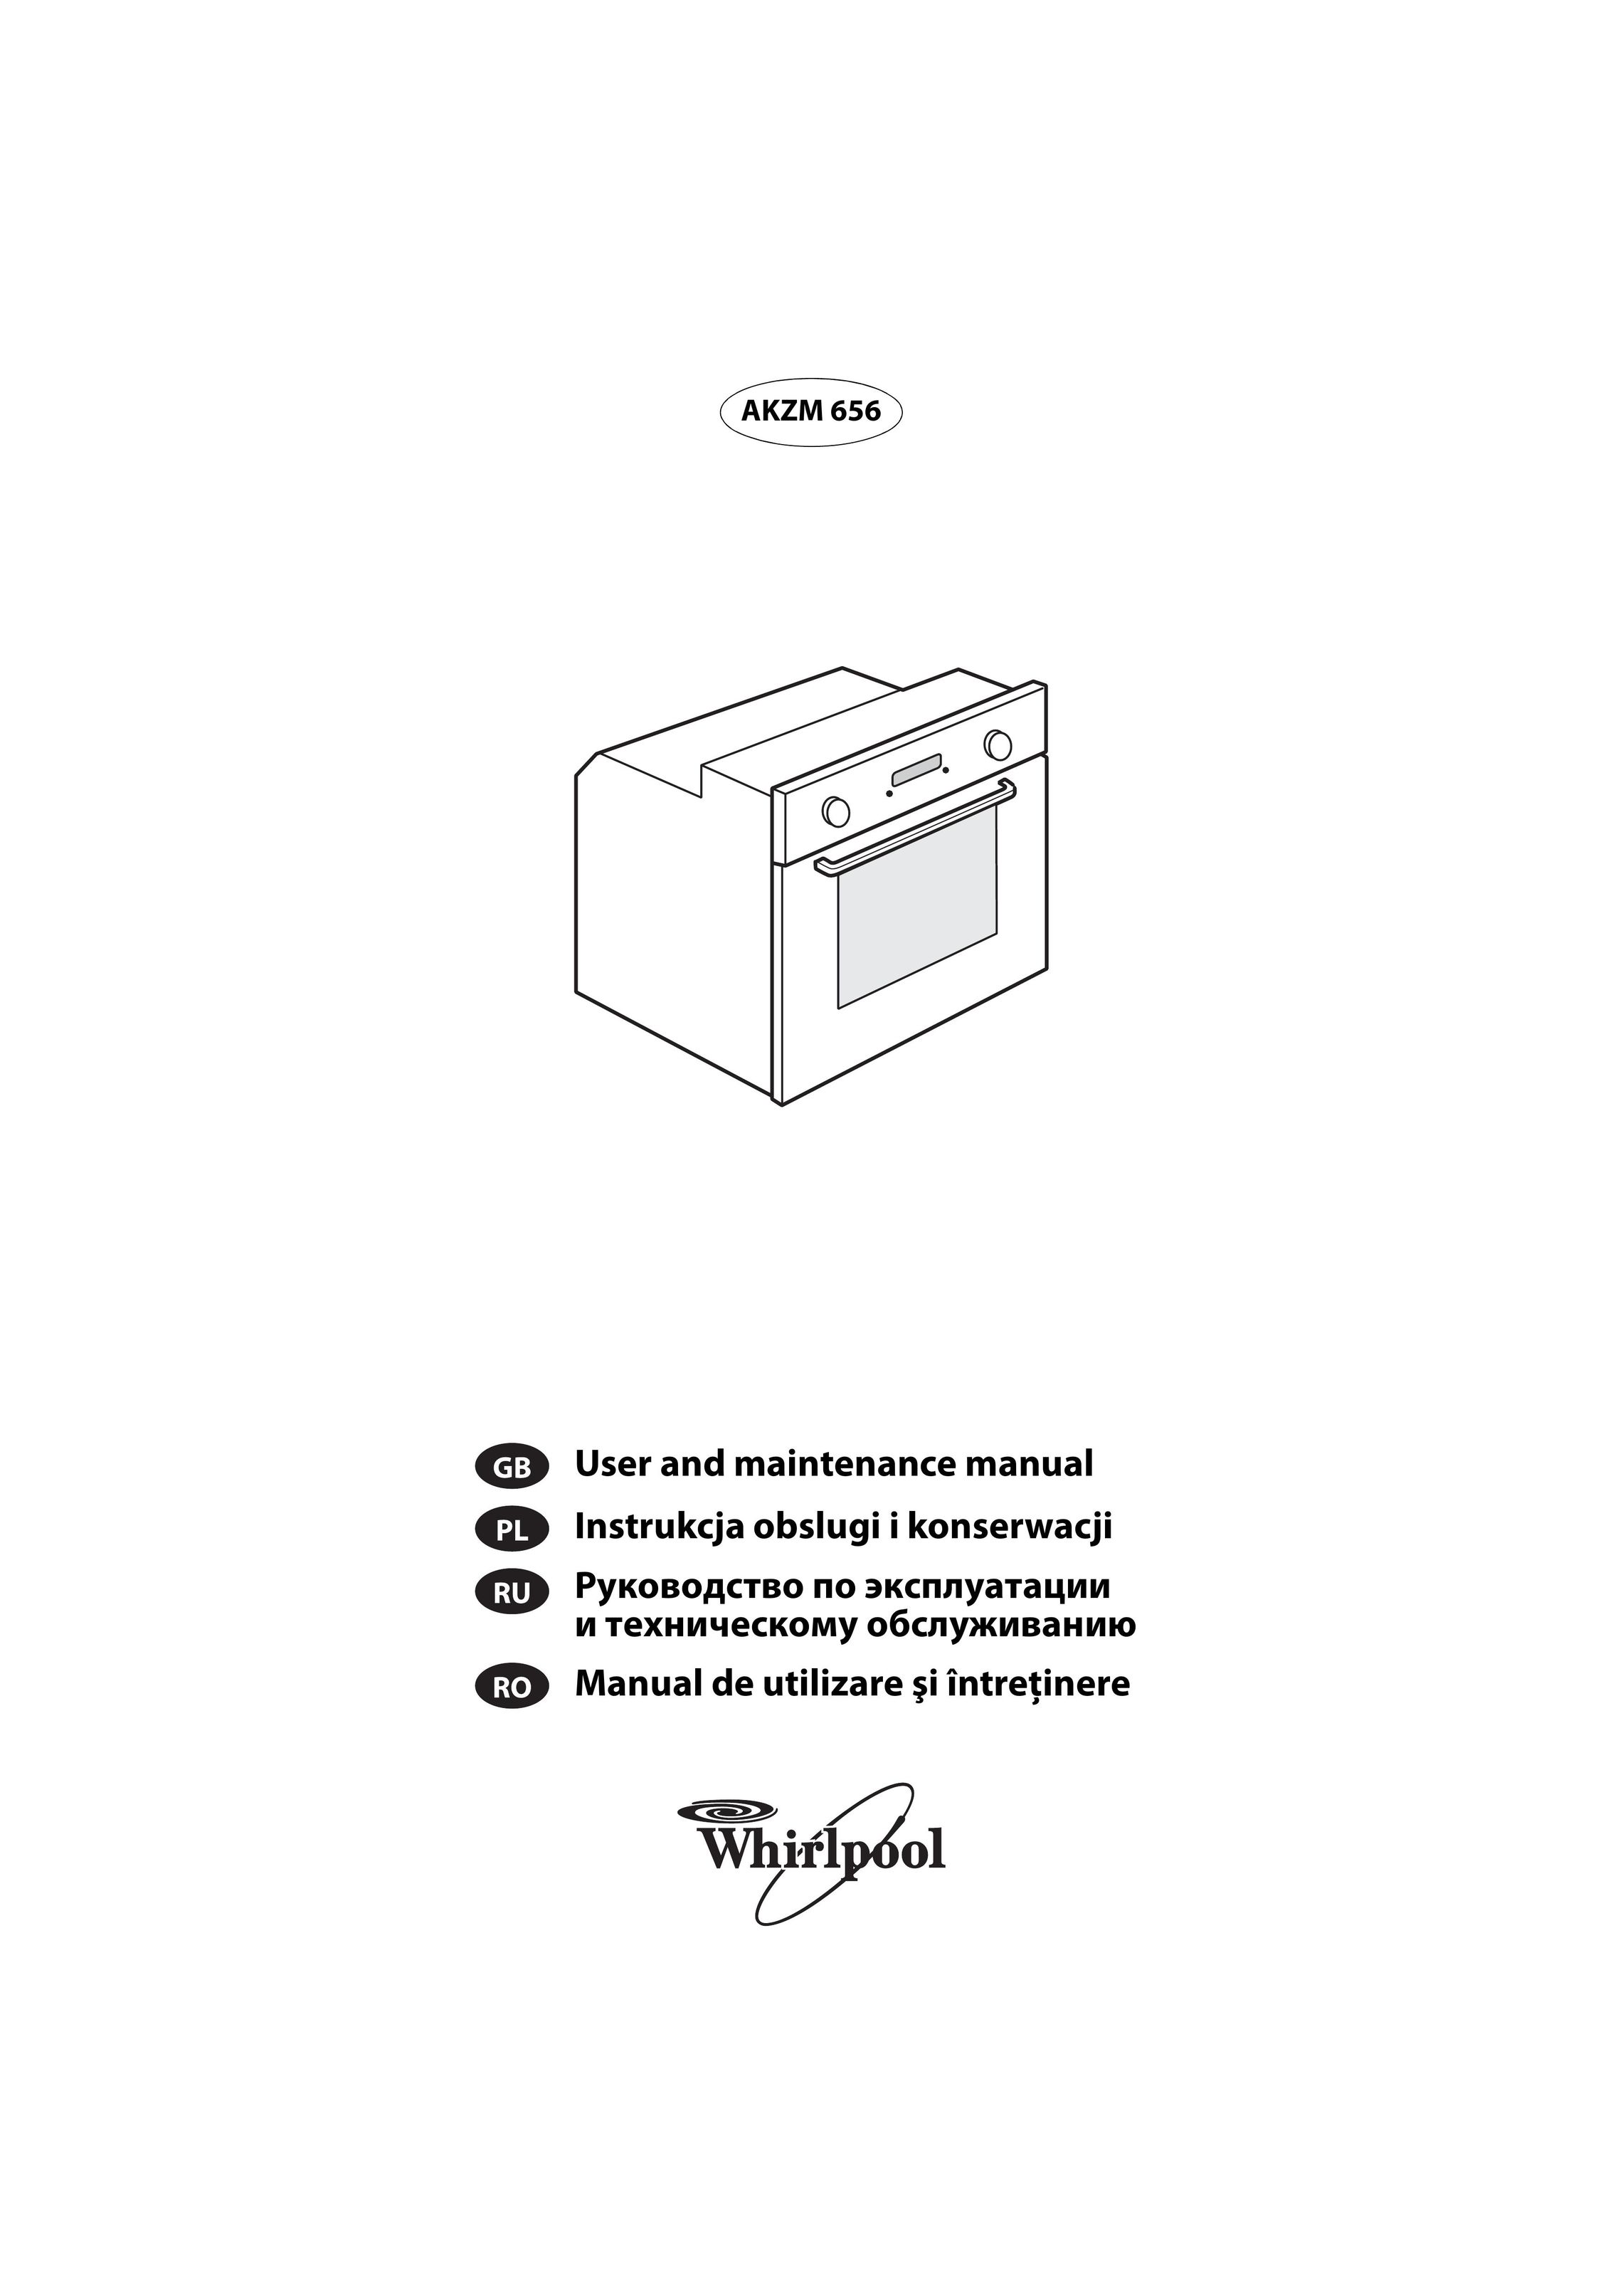 Whirlpool AKZM 656 Double Oven User Manual